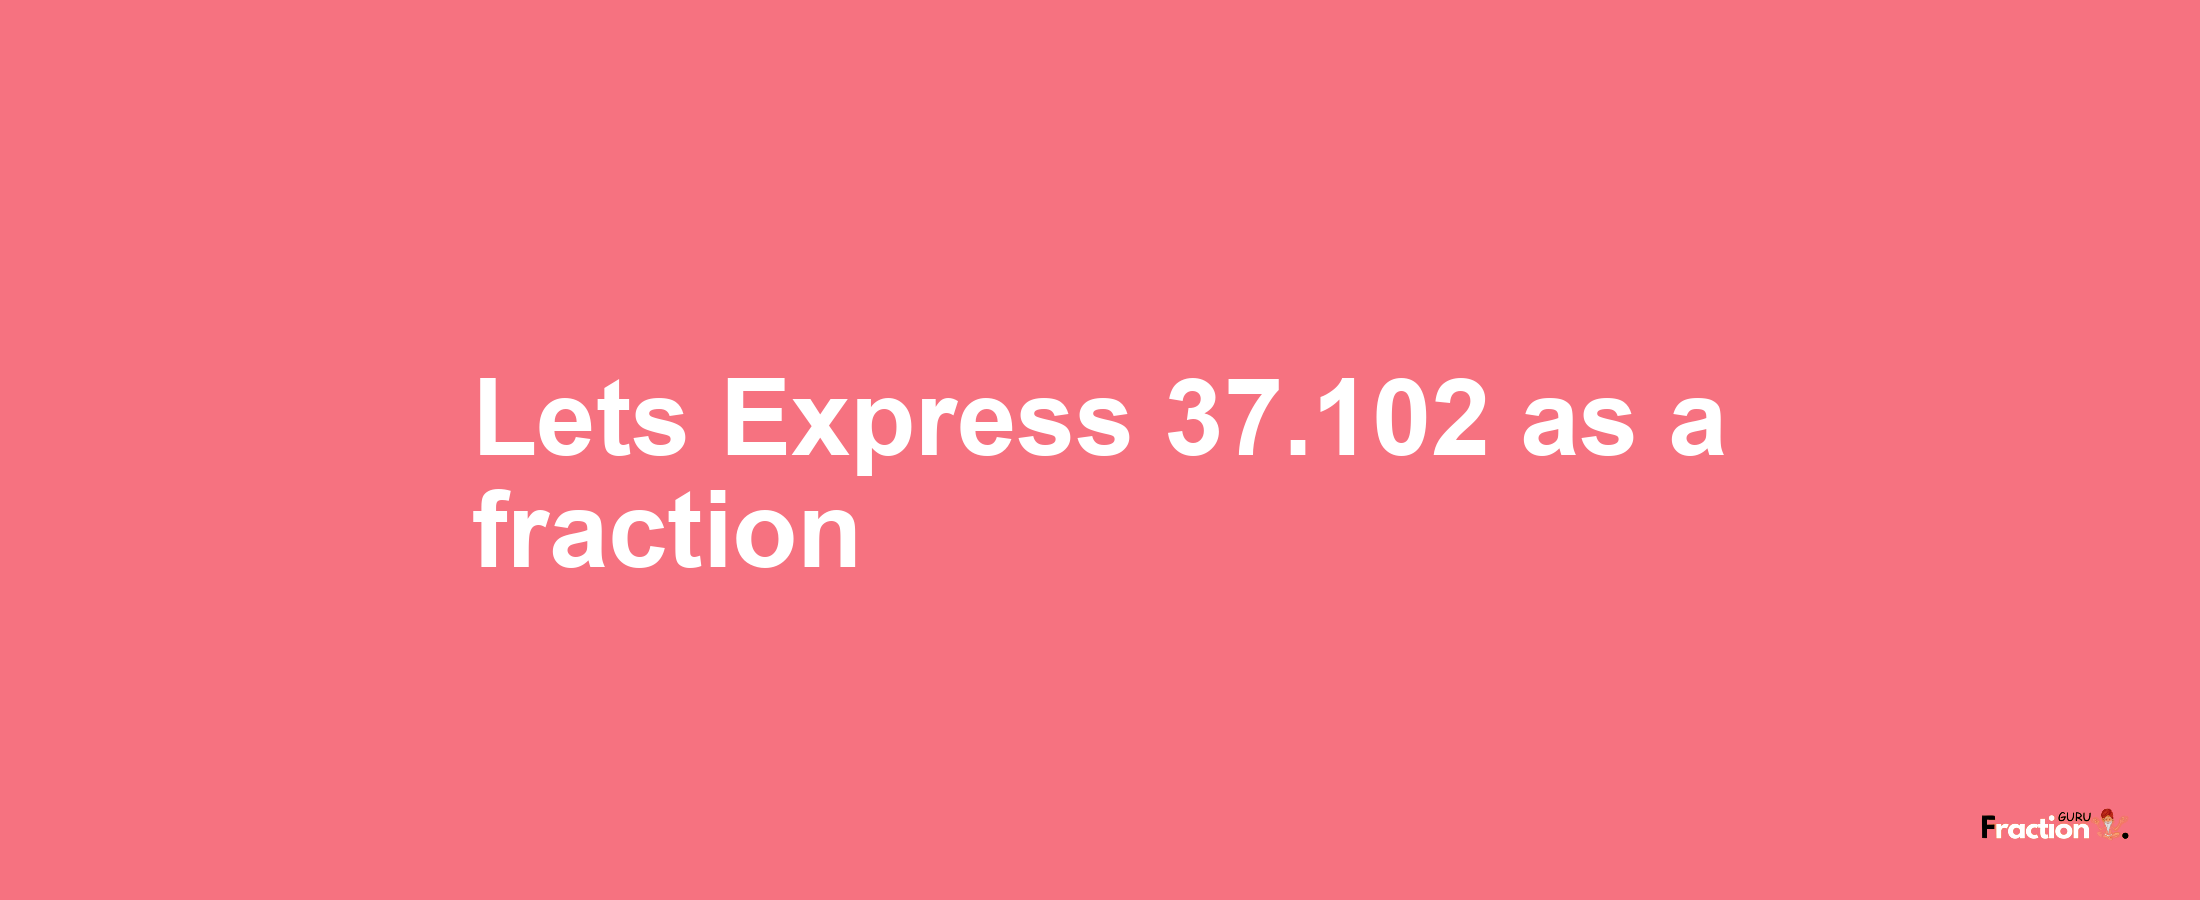 Lets Express 37.102 as afraction